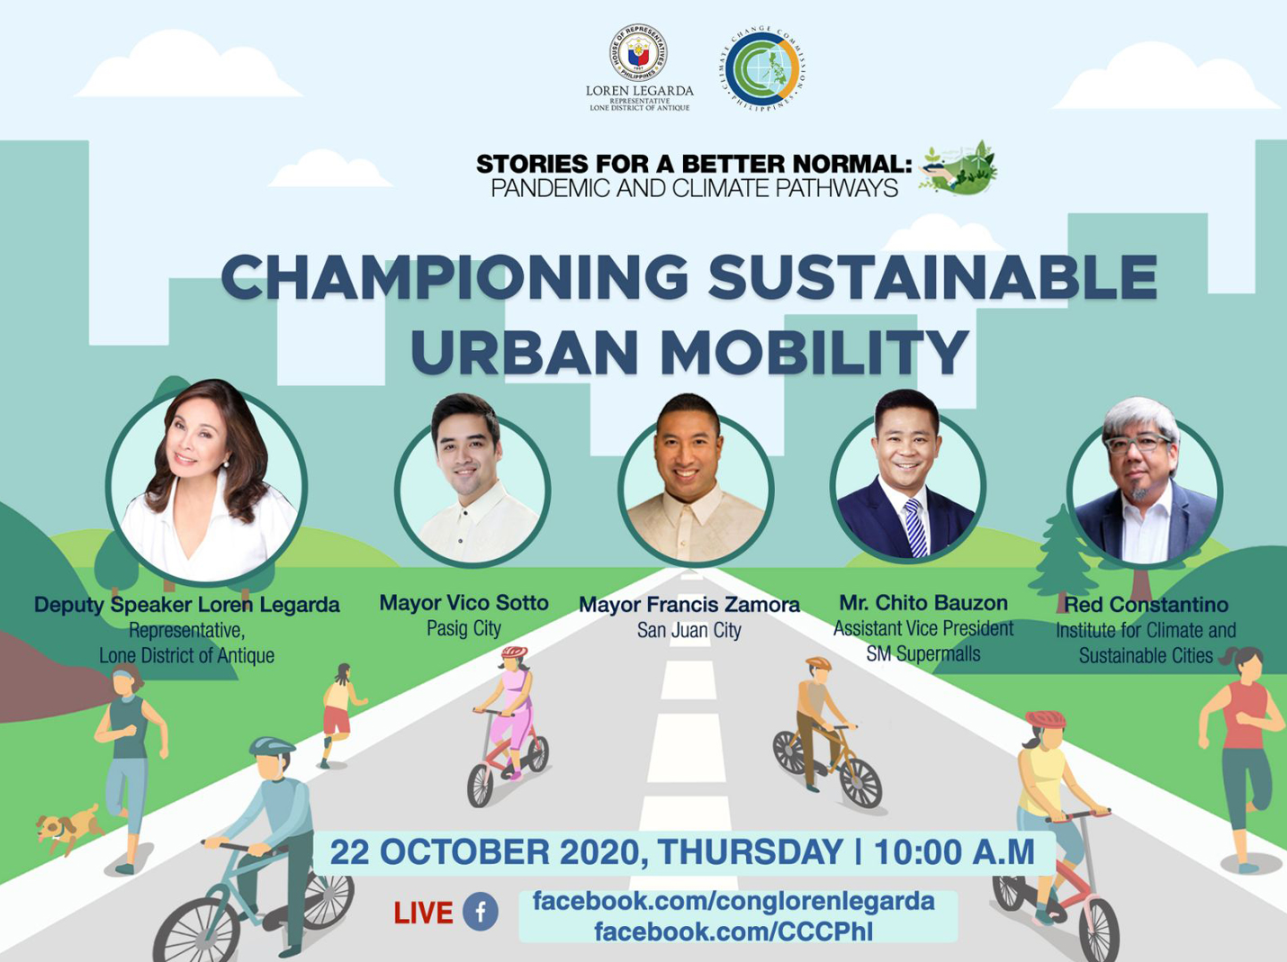 bike-friendly-cities-and-establishments-to-be-featured-in-23rd-episode-of-stories-for-a-better-normal-series